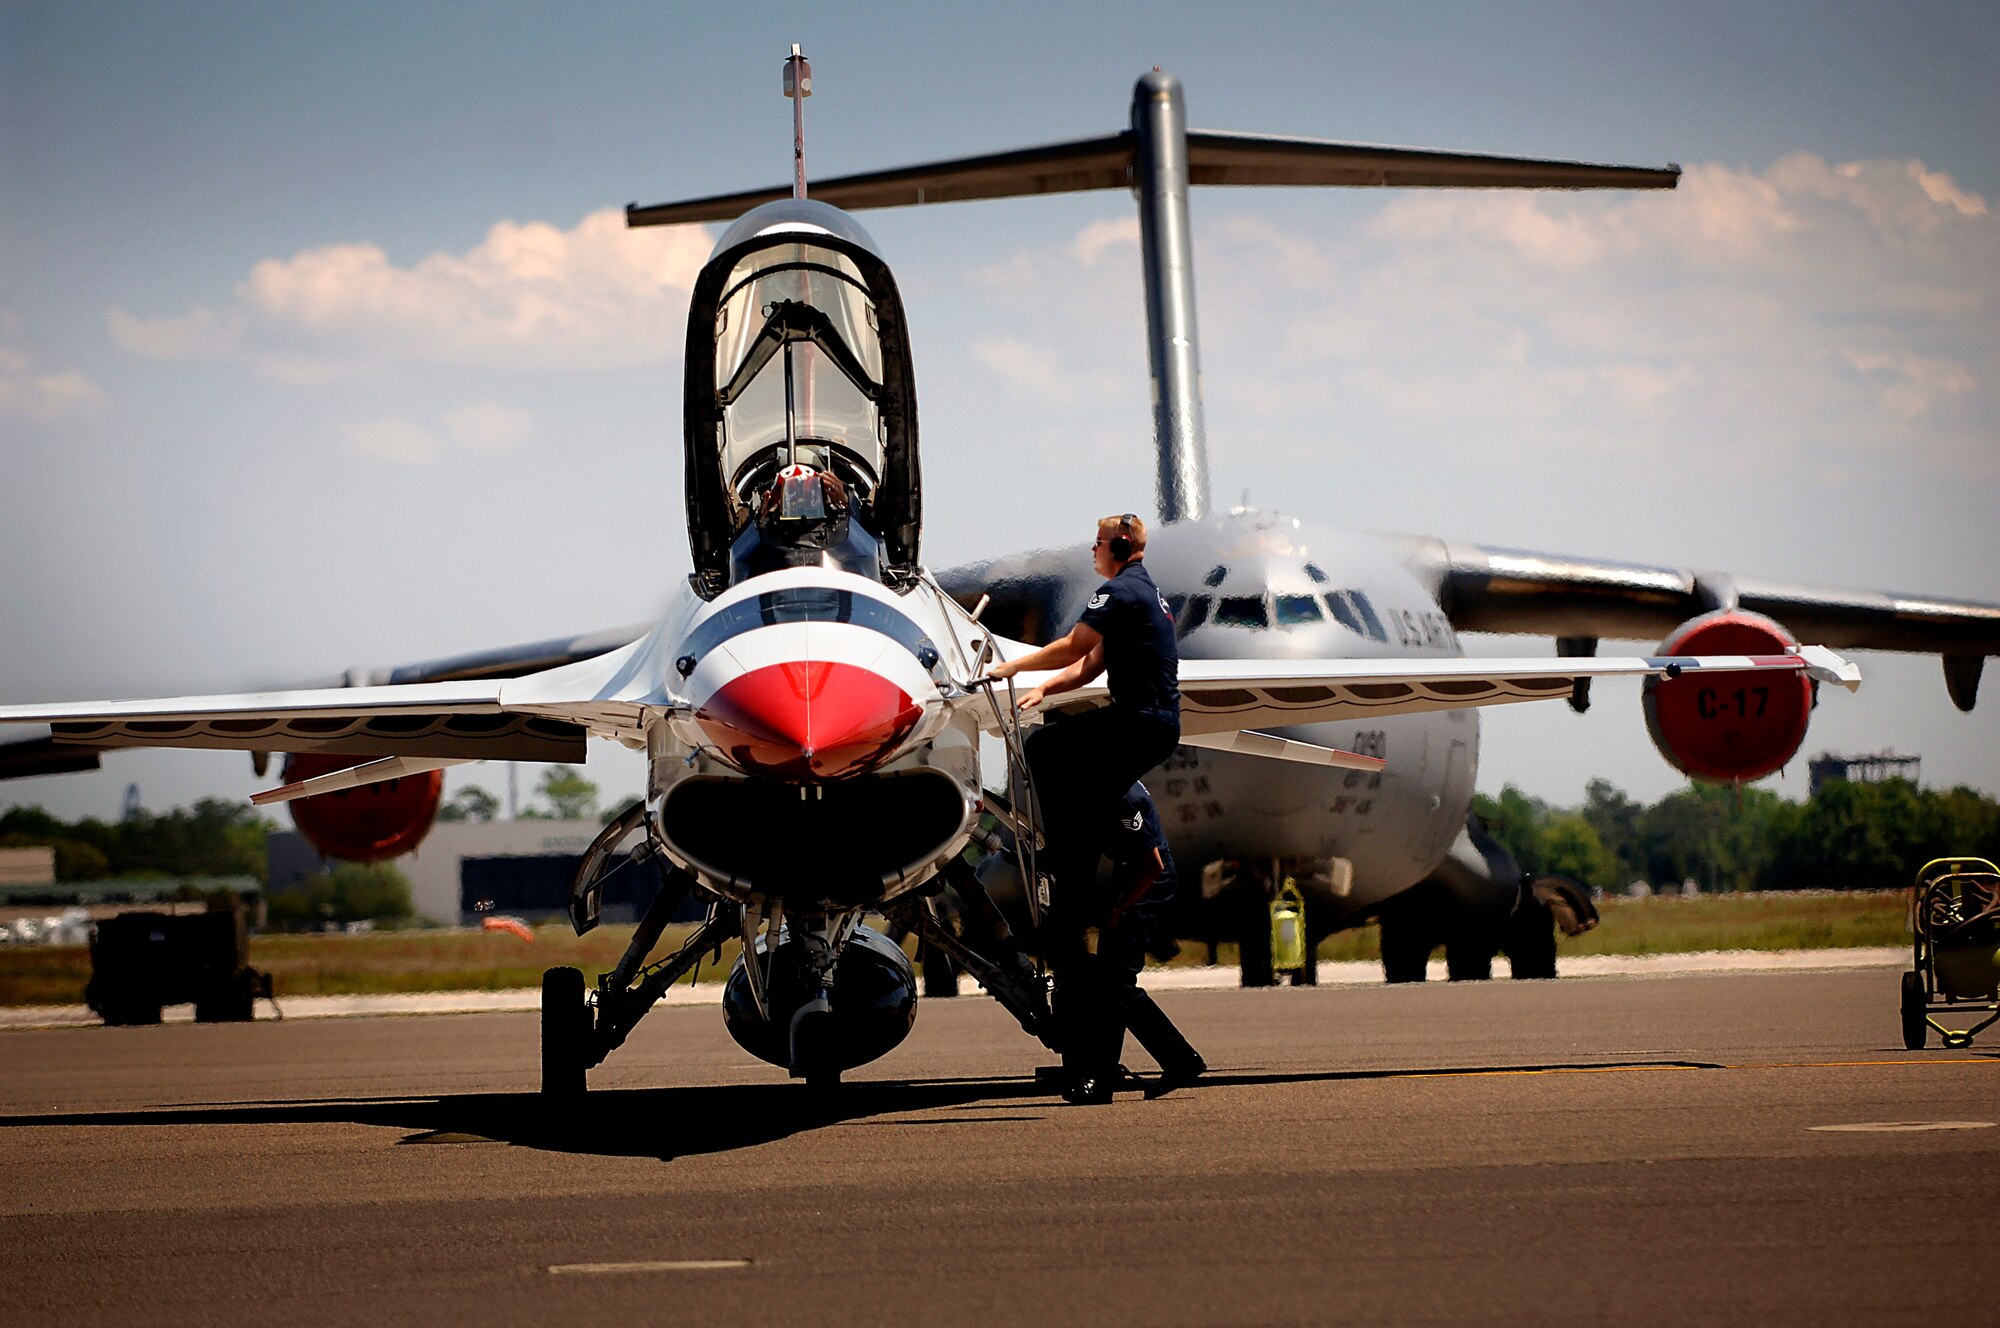 Tech. Sgt. David Batterson climbs up to greet Thunderbird Five upon arrival to the Charleston AFB flightline Monday. Sergeant Batterson is a crew chief for the Thunderbirds who will perform at the 2008 "Wings Over Charleston" Air Expo at Charleston AFB Saturday. (U.S. Air Force Photo/Senior Airman Nicholas Pilch)